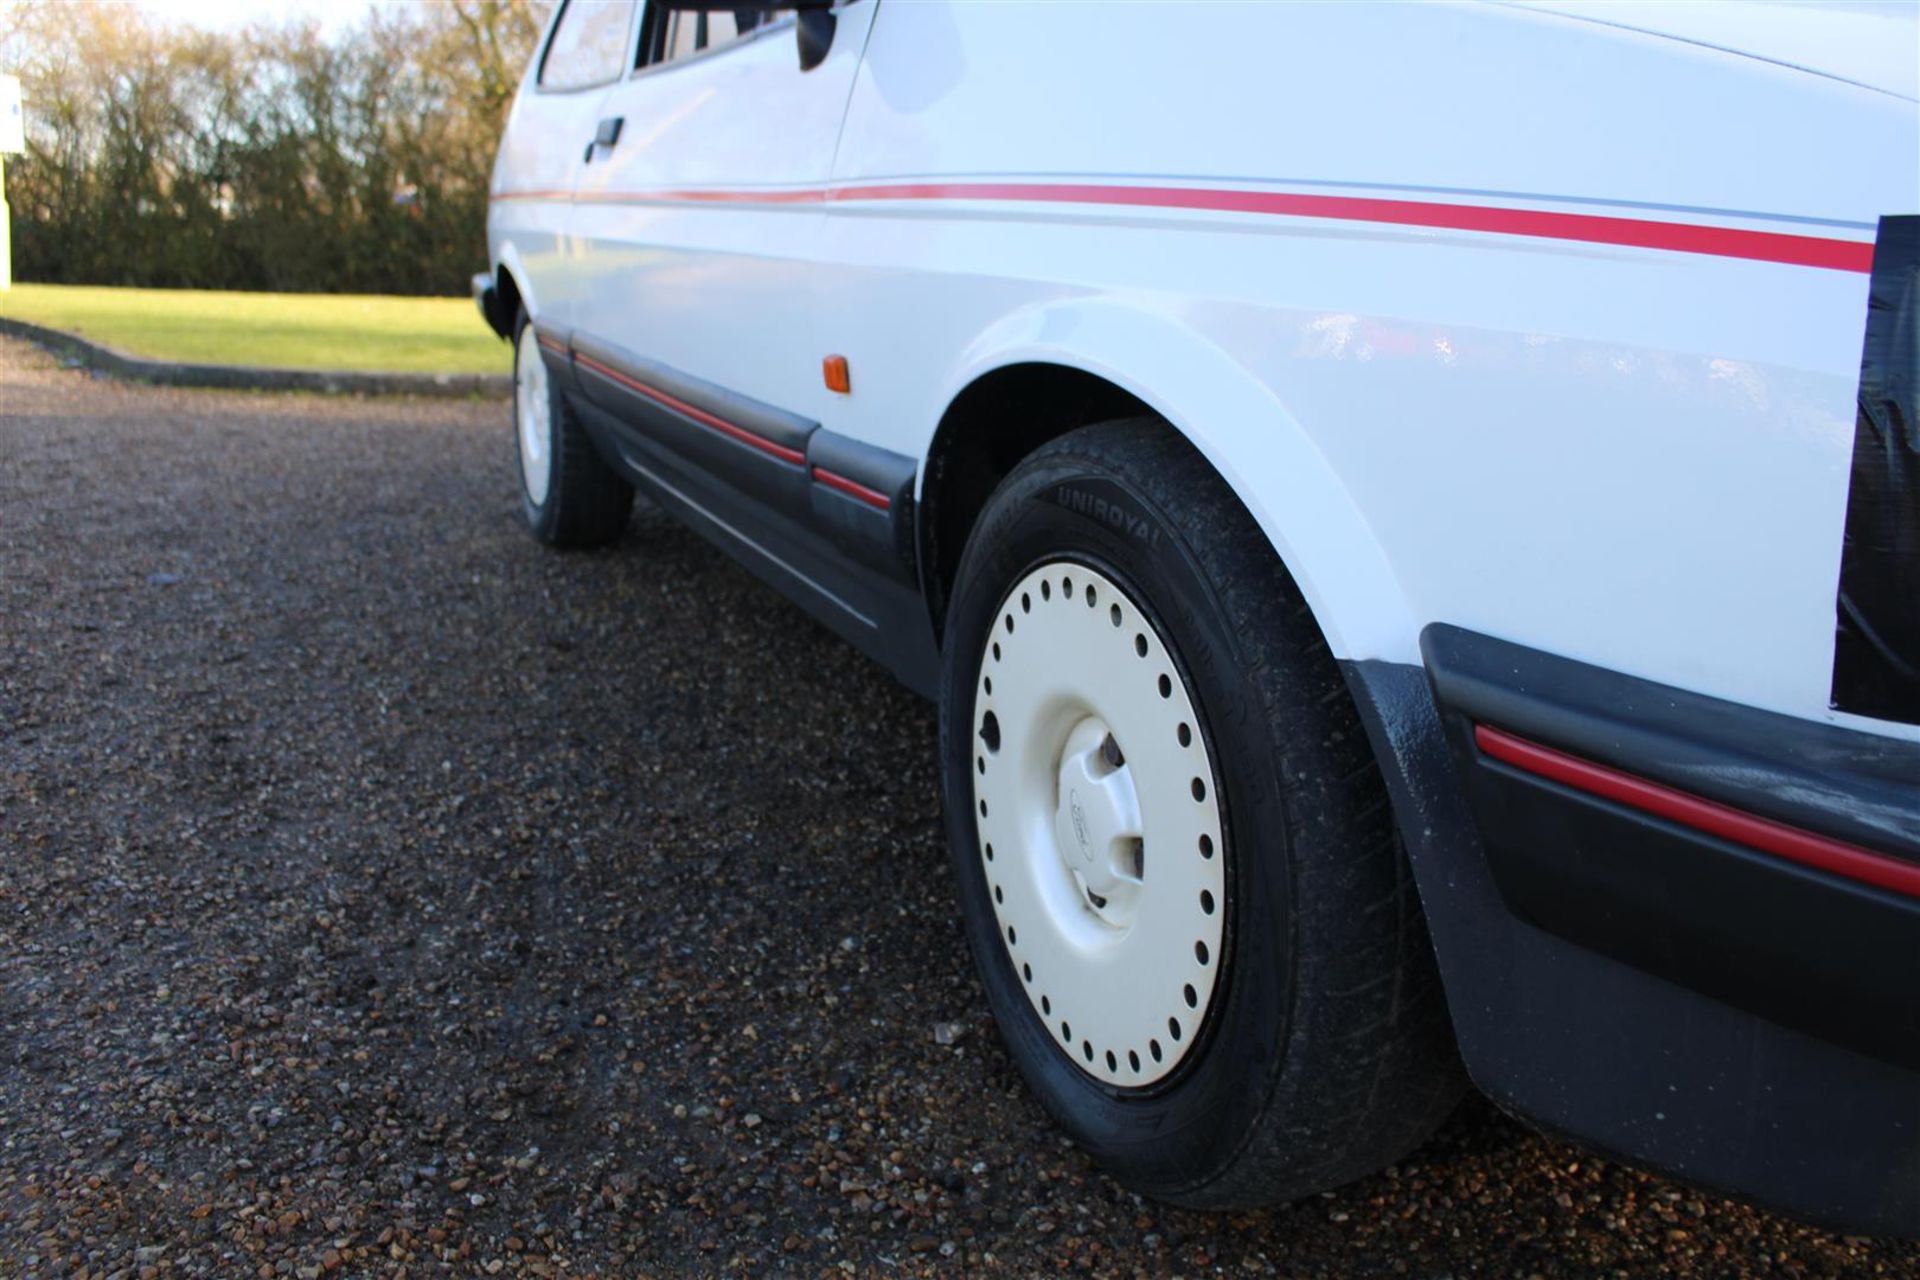 1987 Ford Fiesta 1.4 S Mk2 - Image 22 of 29